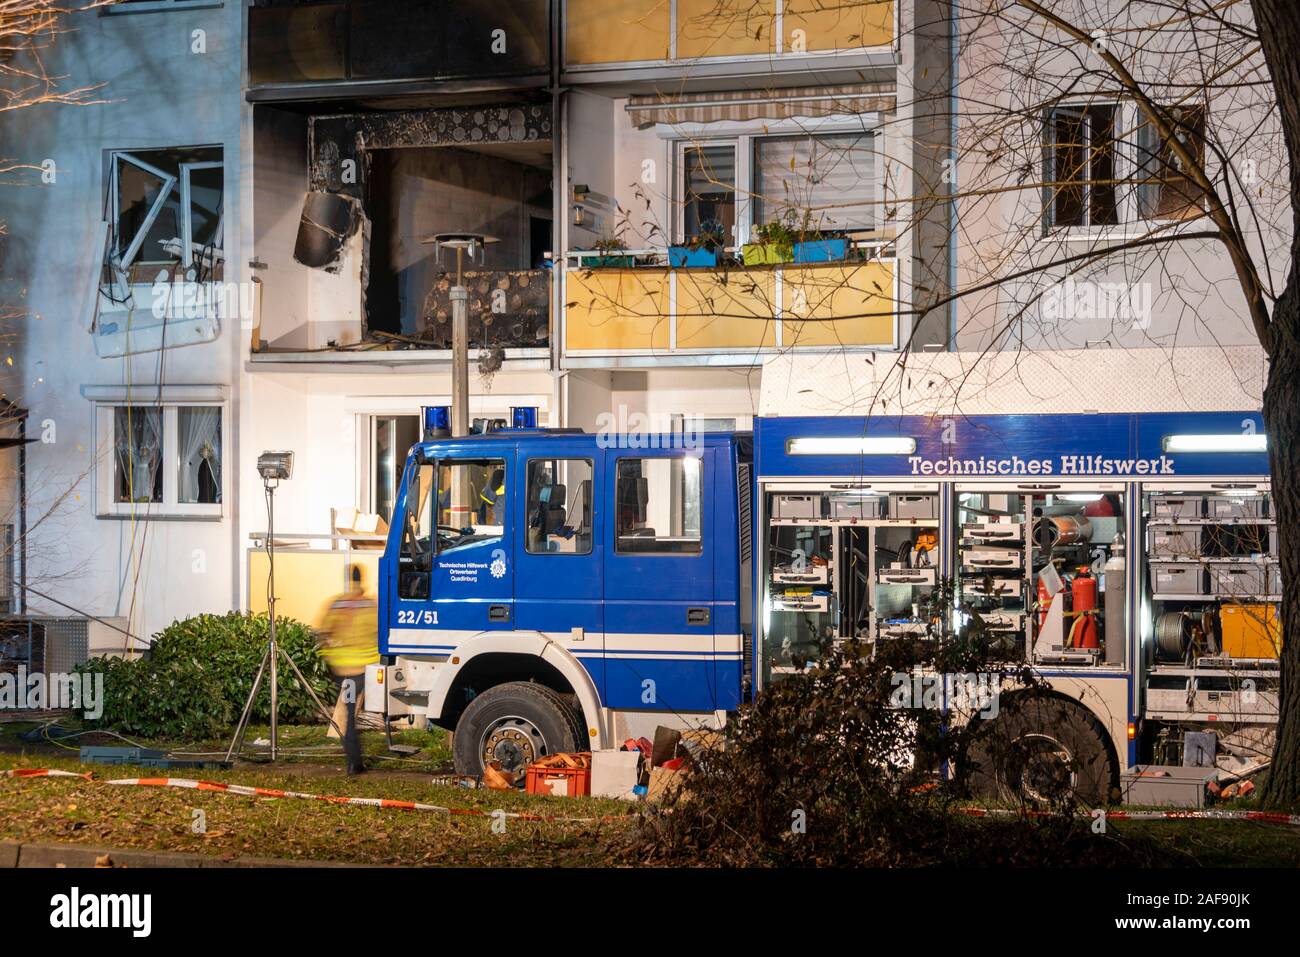 Blankenburg, Germany. 13th Dec, 2019. After a serious explosion in a multi-family house in Blankenburg in the Harz Mountains, some balconies of the house are black with soot. In front of the house there is a vehicle of the Technical Relief Agency (THW). Specialists of the relief organization want to support the ceilings of the building still at night, so that it does not collapse. A 78-year-old man died in the explosion, at least eleven people were injured, some of them seriously. Credit: Mattis Kaminer/Alamy Live News Stock Photo